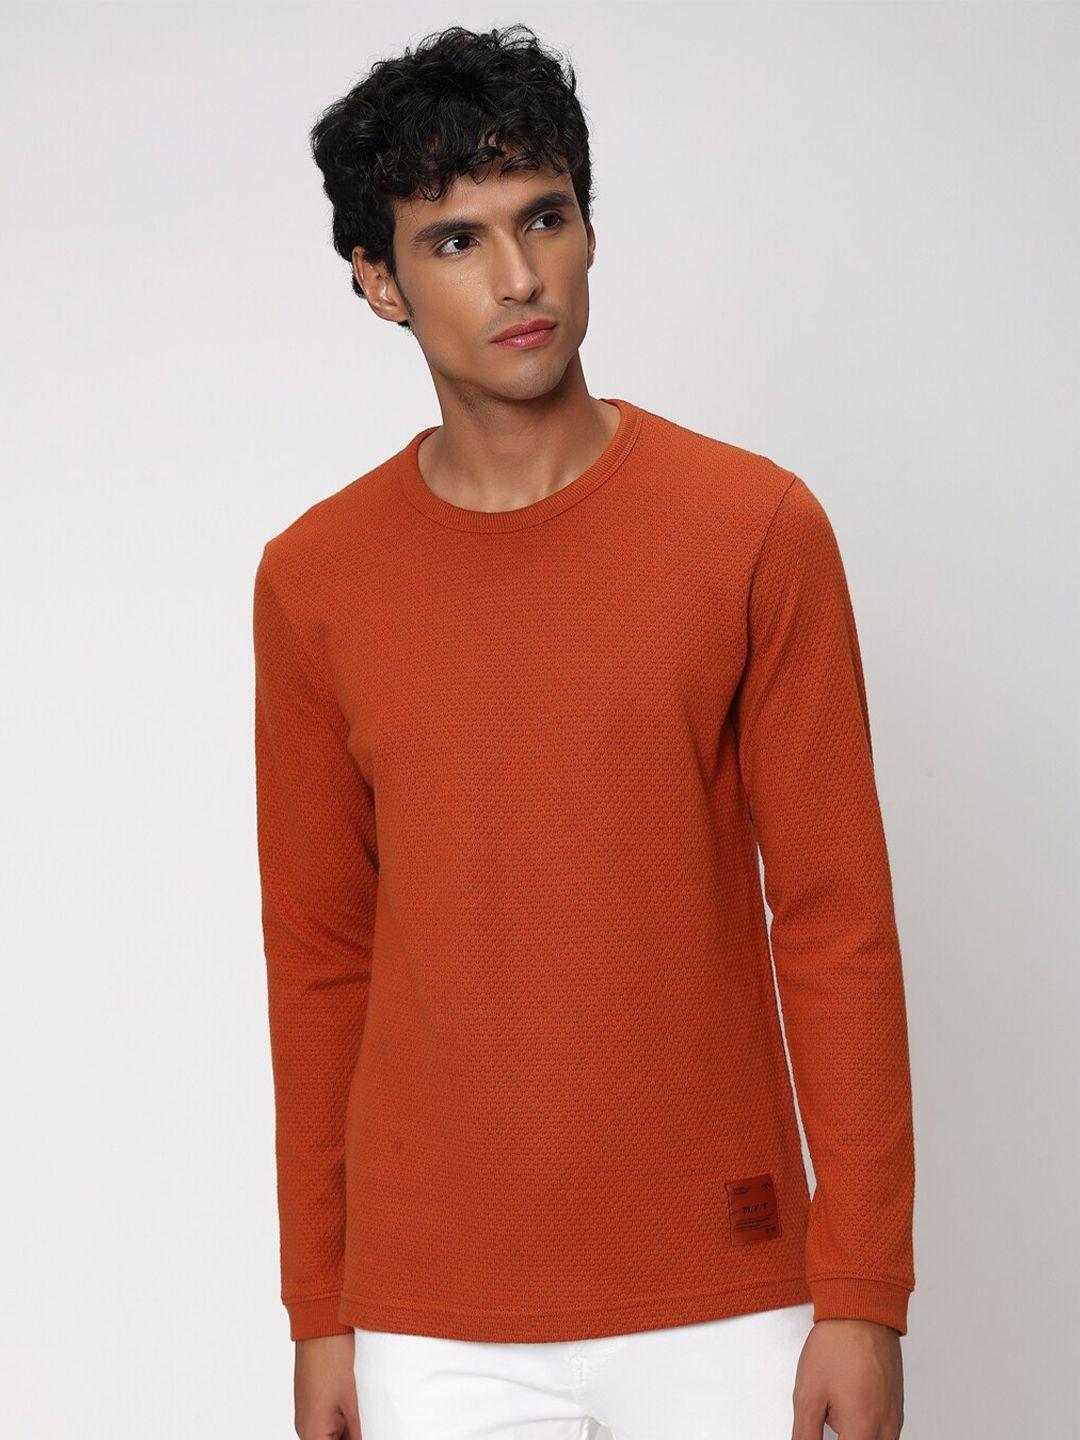 mufti-crew-neck-long-sleeves-slim-fit-t-shirt